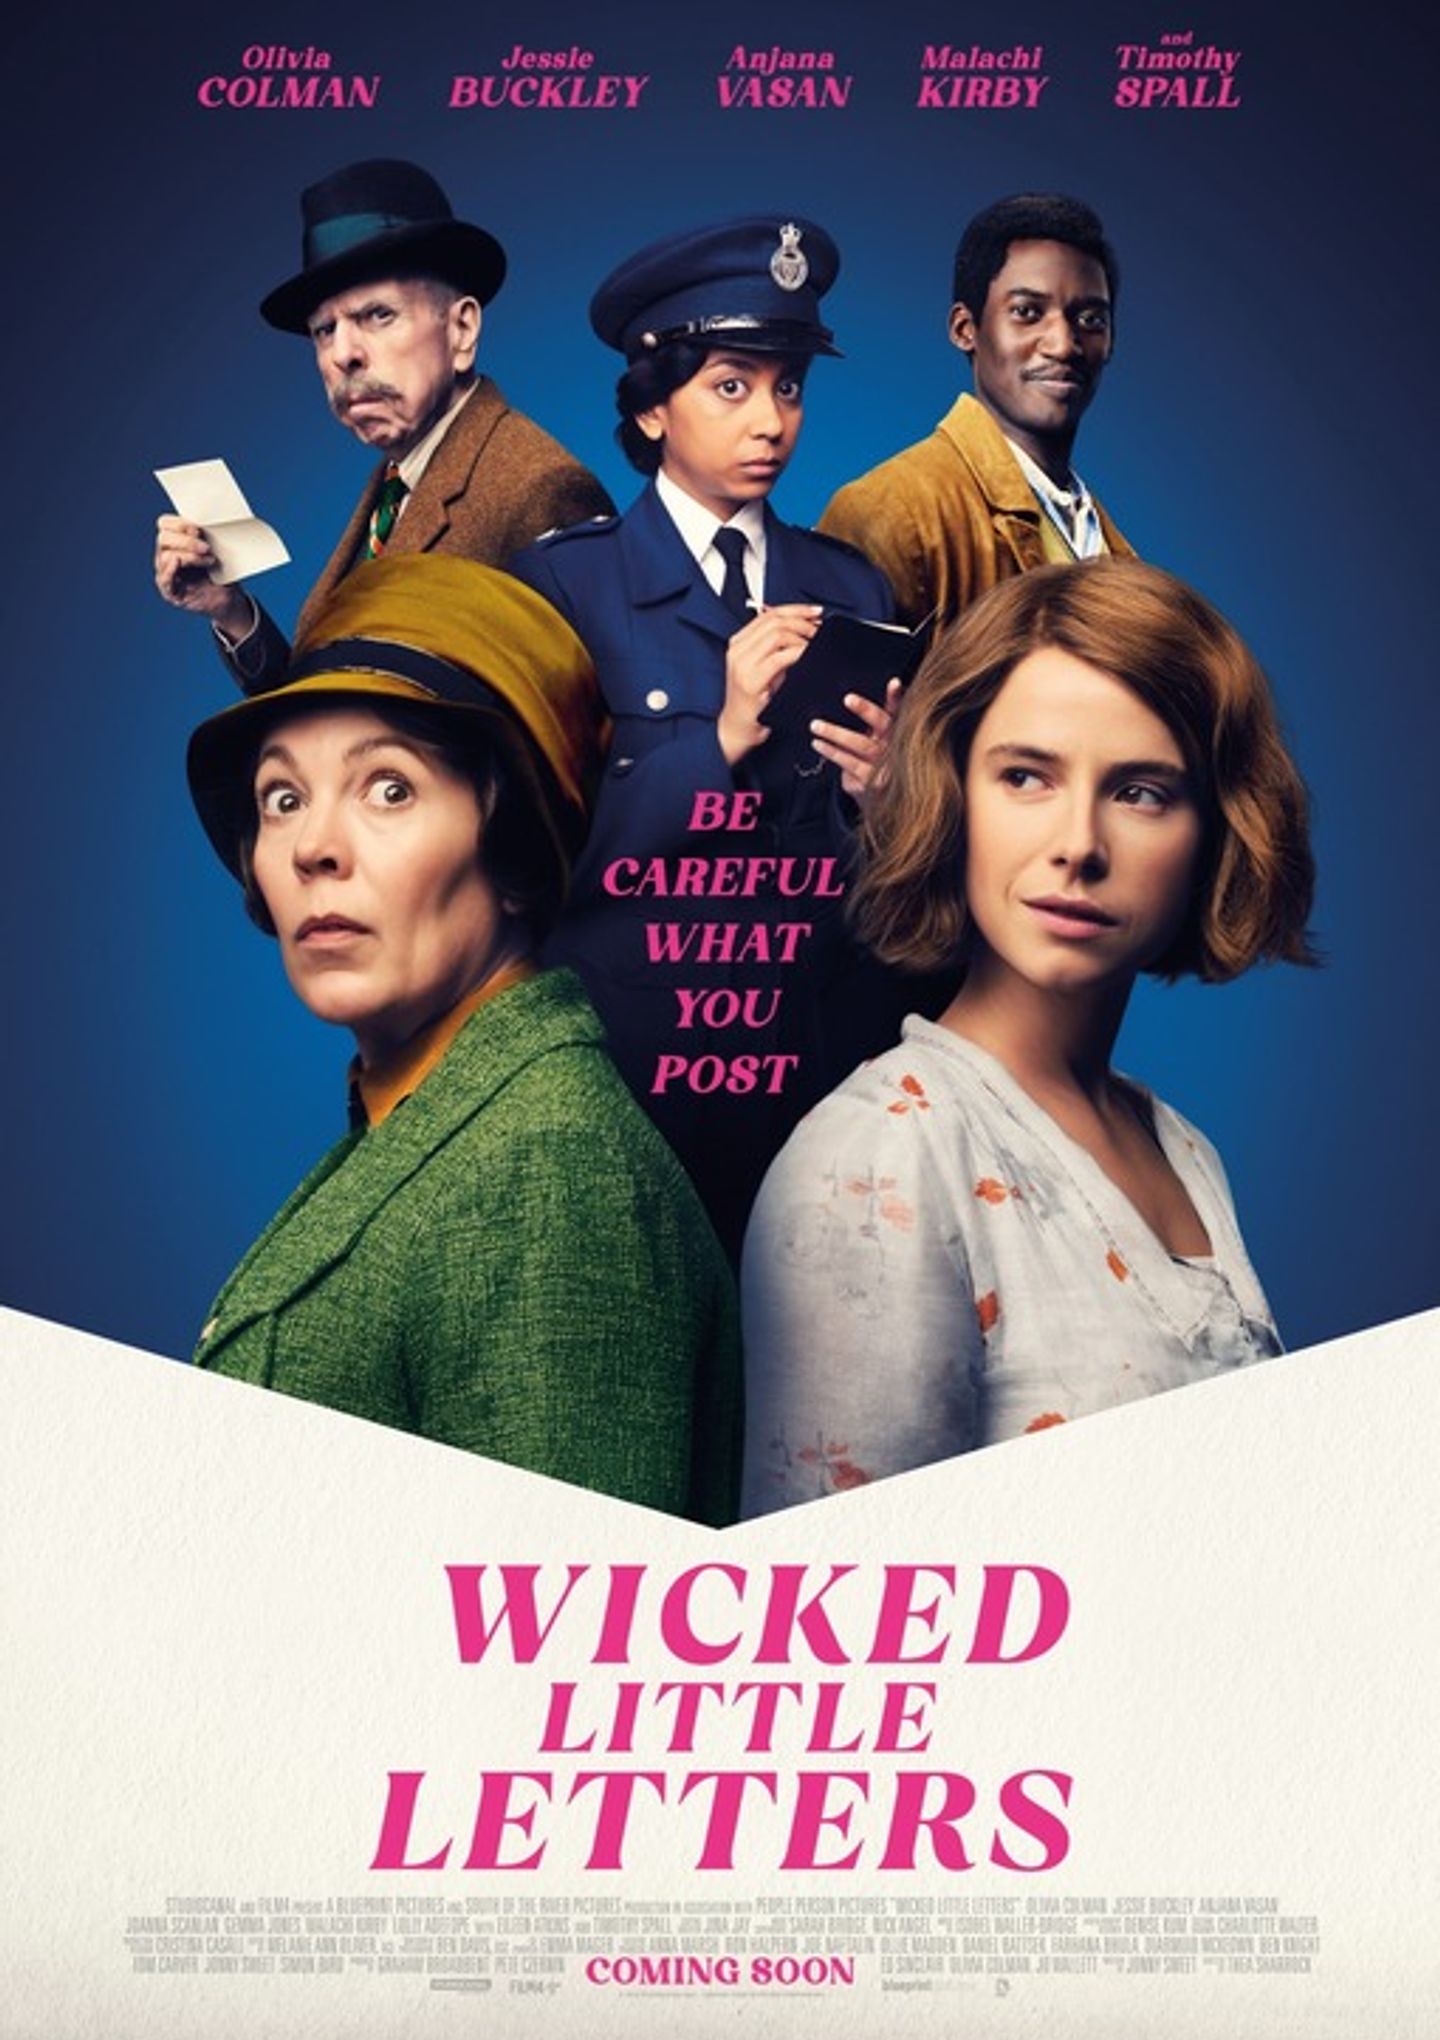 Plakat for 'Wicked Little Letters'